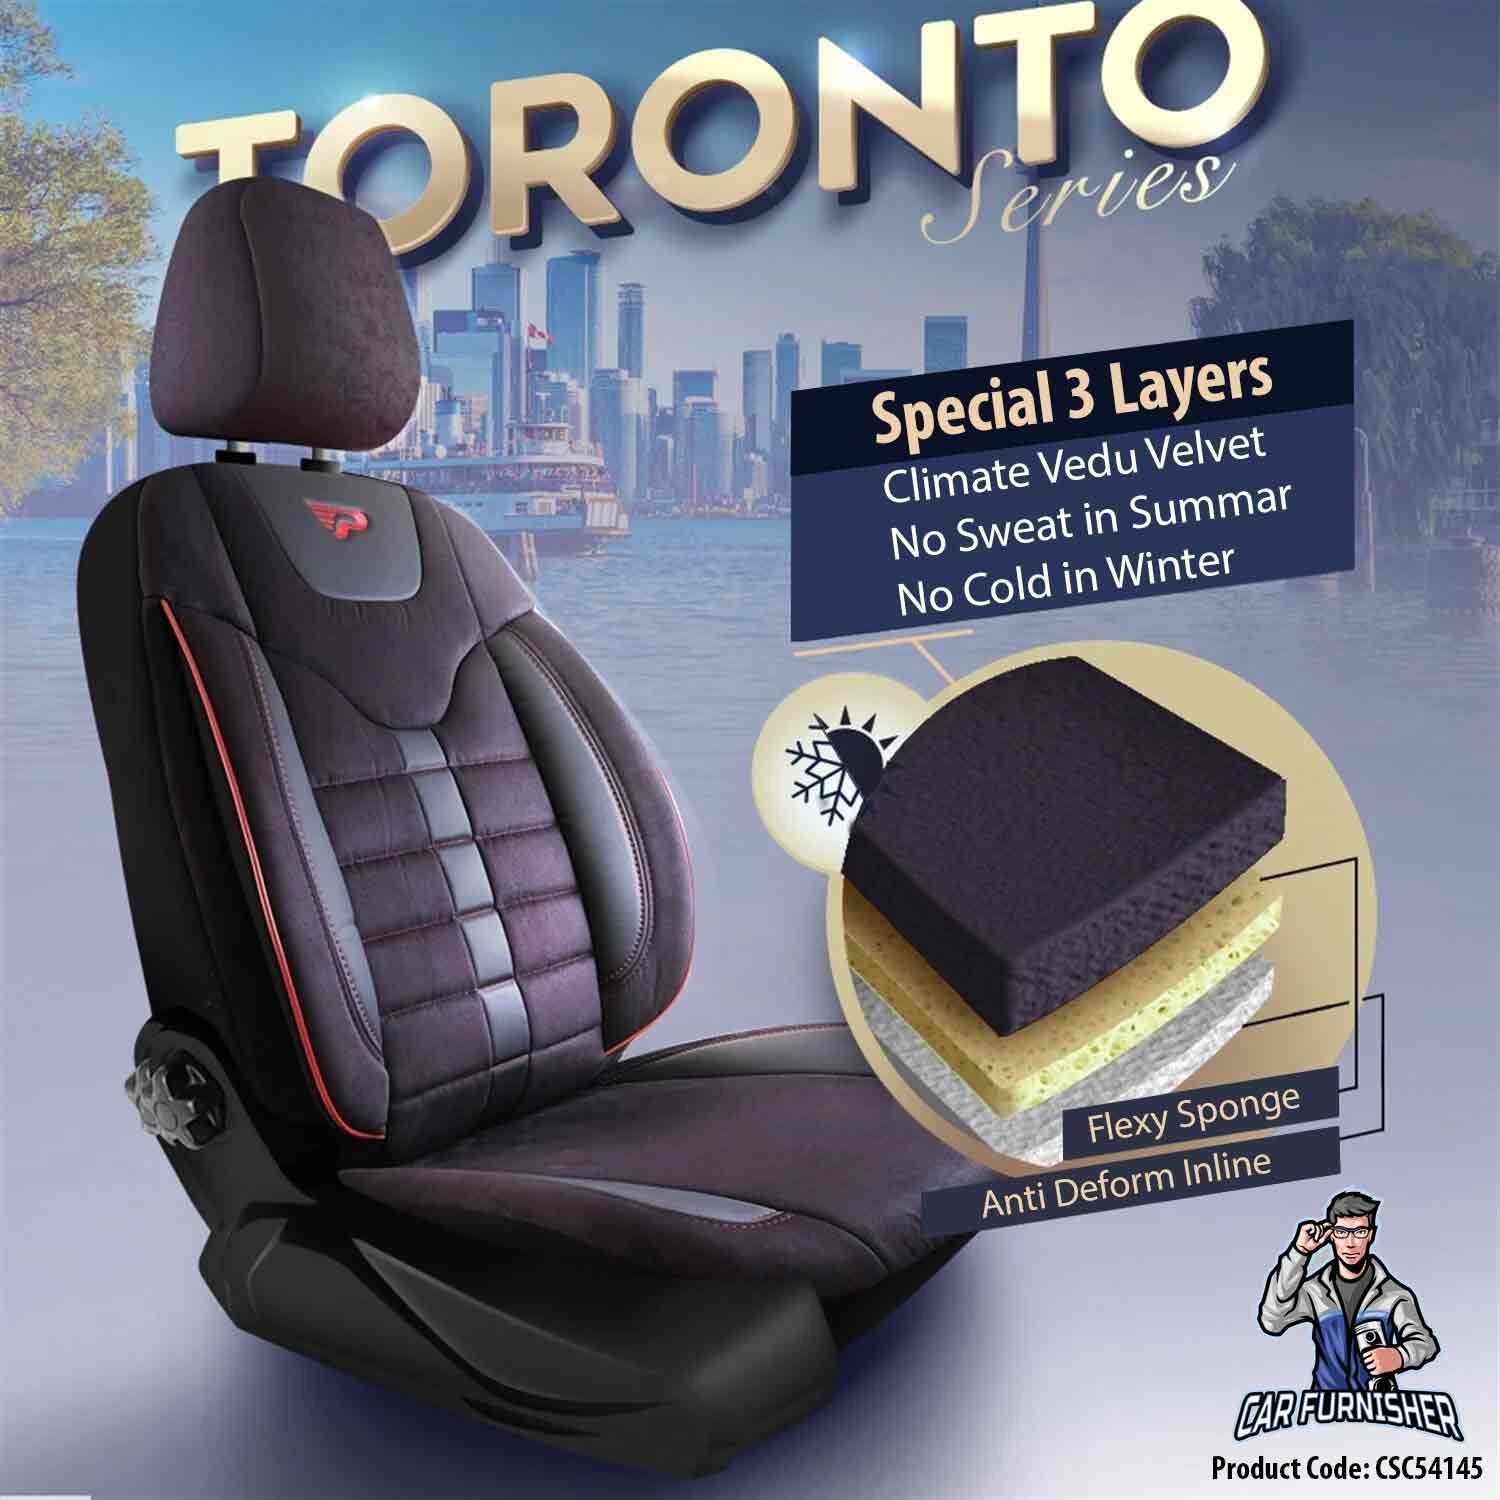 Mercedes 190 Seat Covers Toronto Design Dark Red 5 Seats + Headrests (Full Set) Leather & Suede Fabric